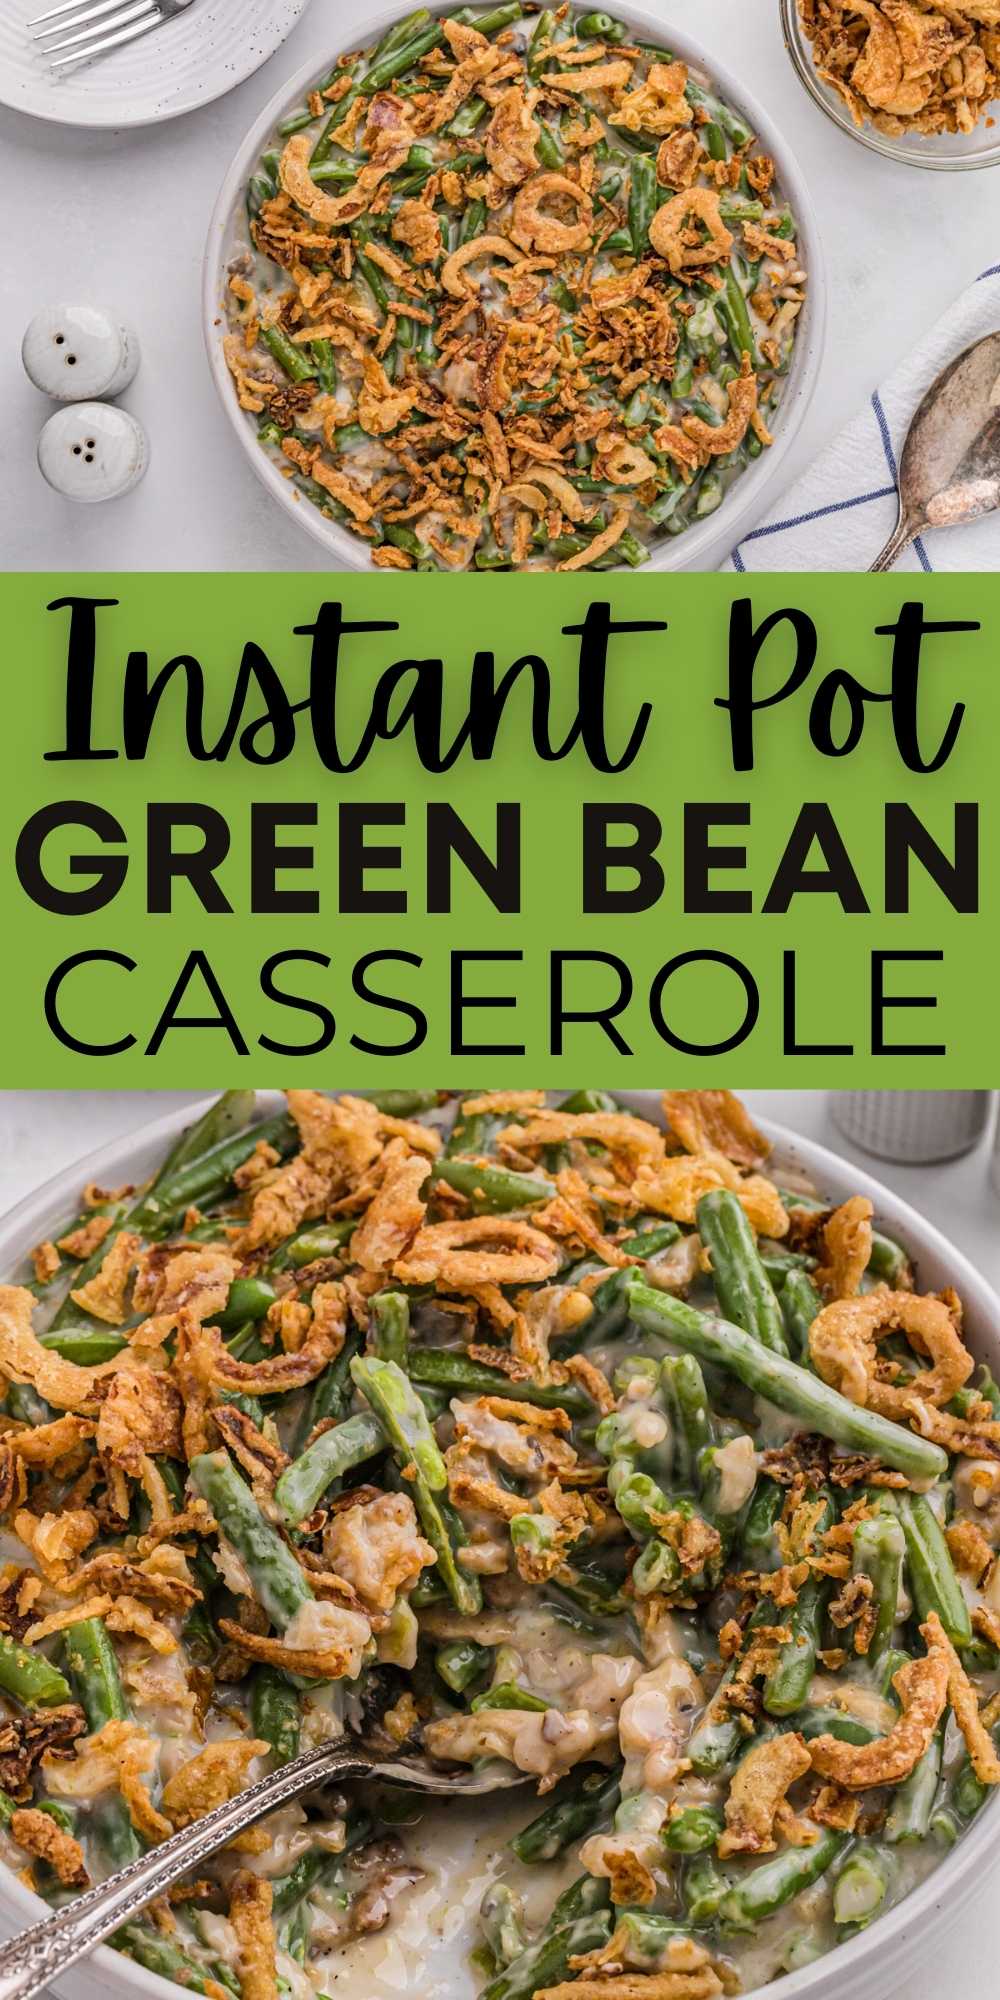 Save time and oven space and make Instant Pot Green Bean Casserole. This classic side dish will be made quick and easy in the Instant Pot. Easy to make with simple ingredients, #eatingonadime #greenbeancasserole #instantpotrecipes